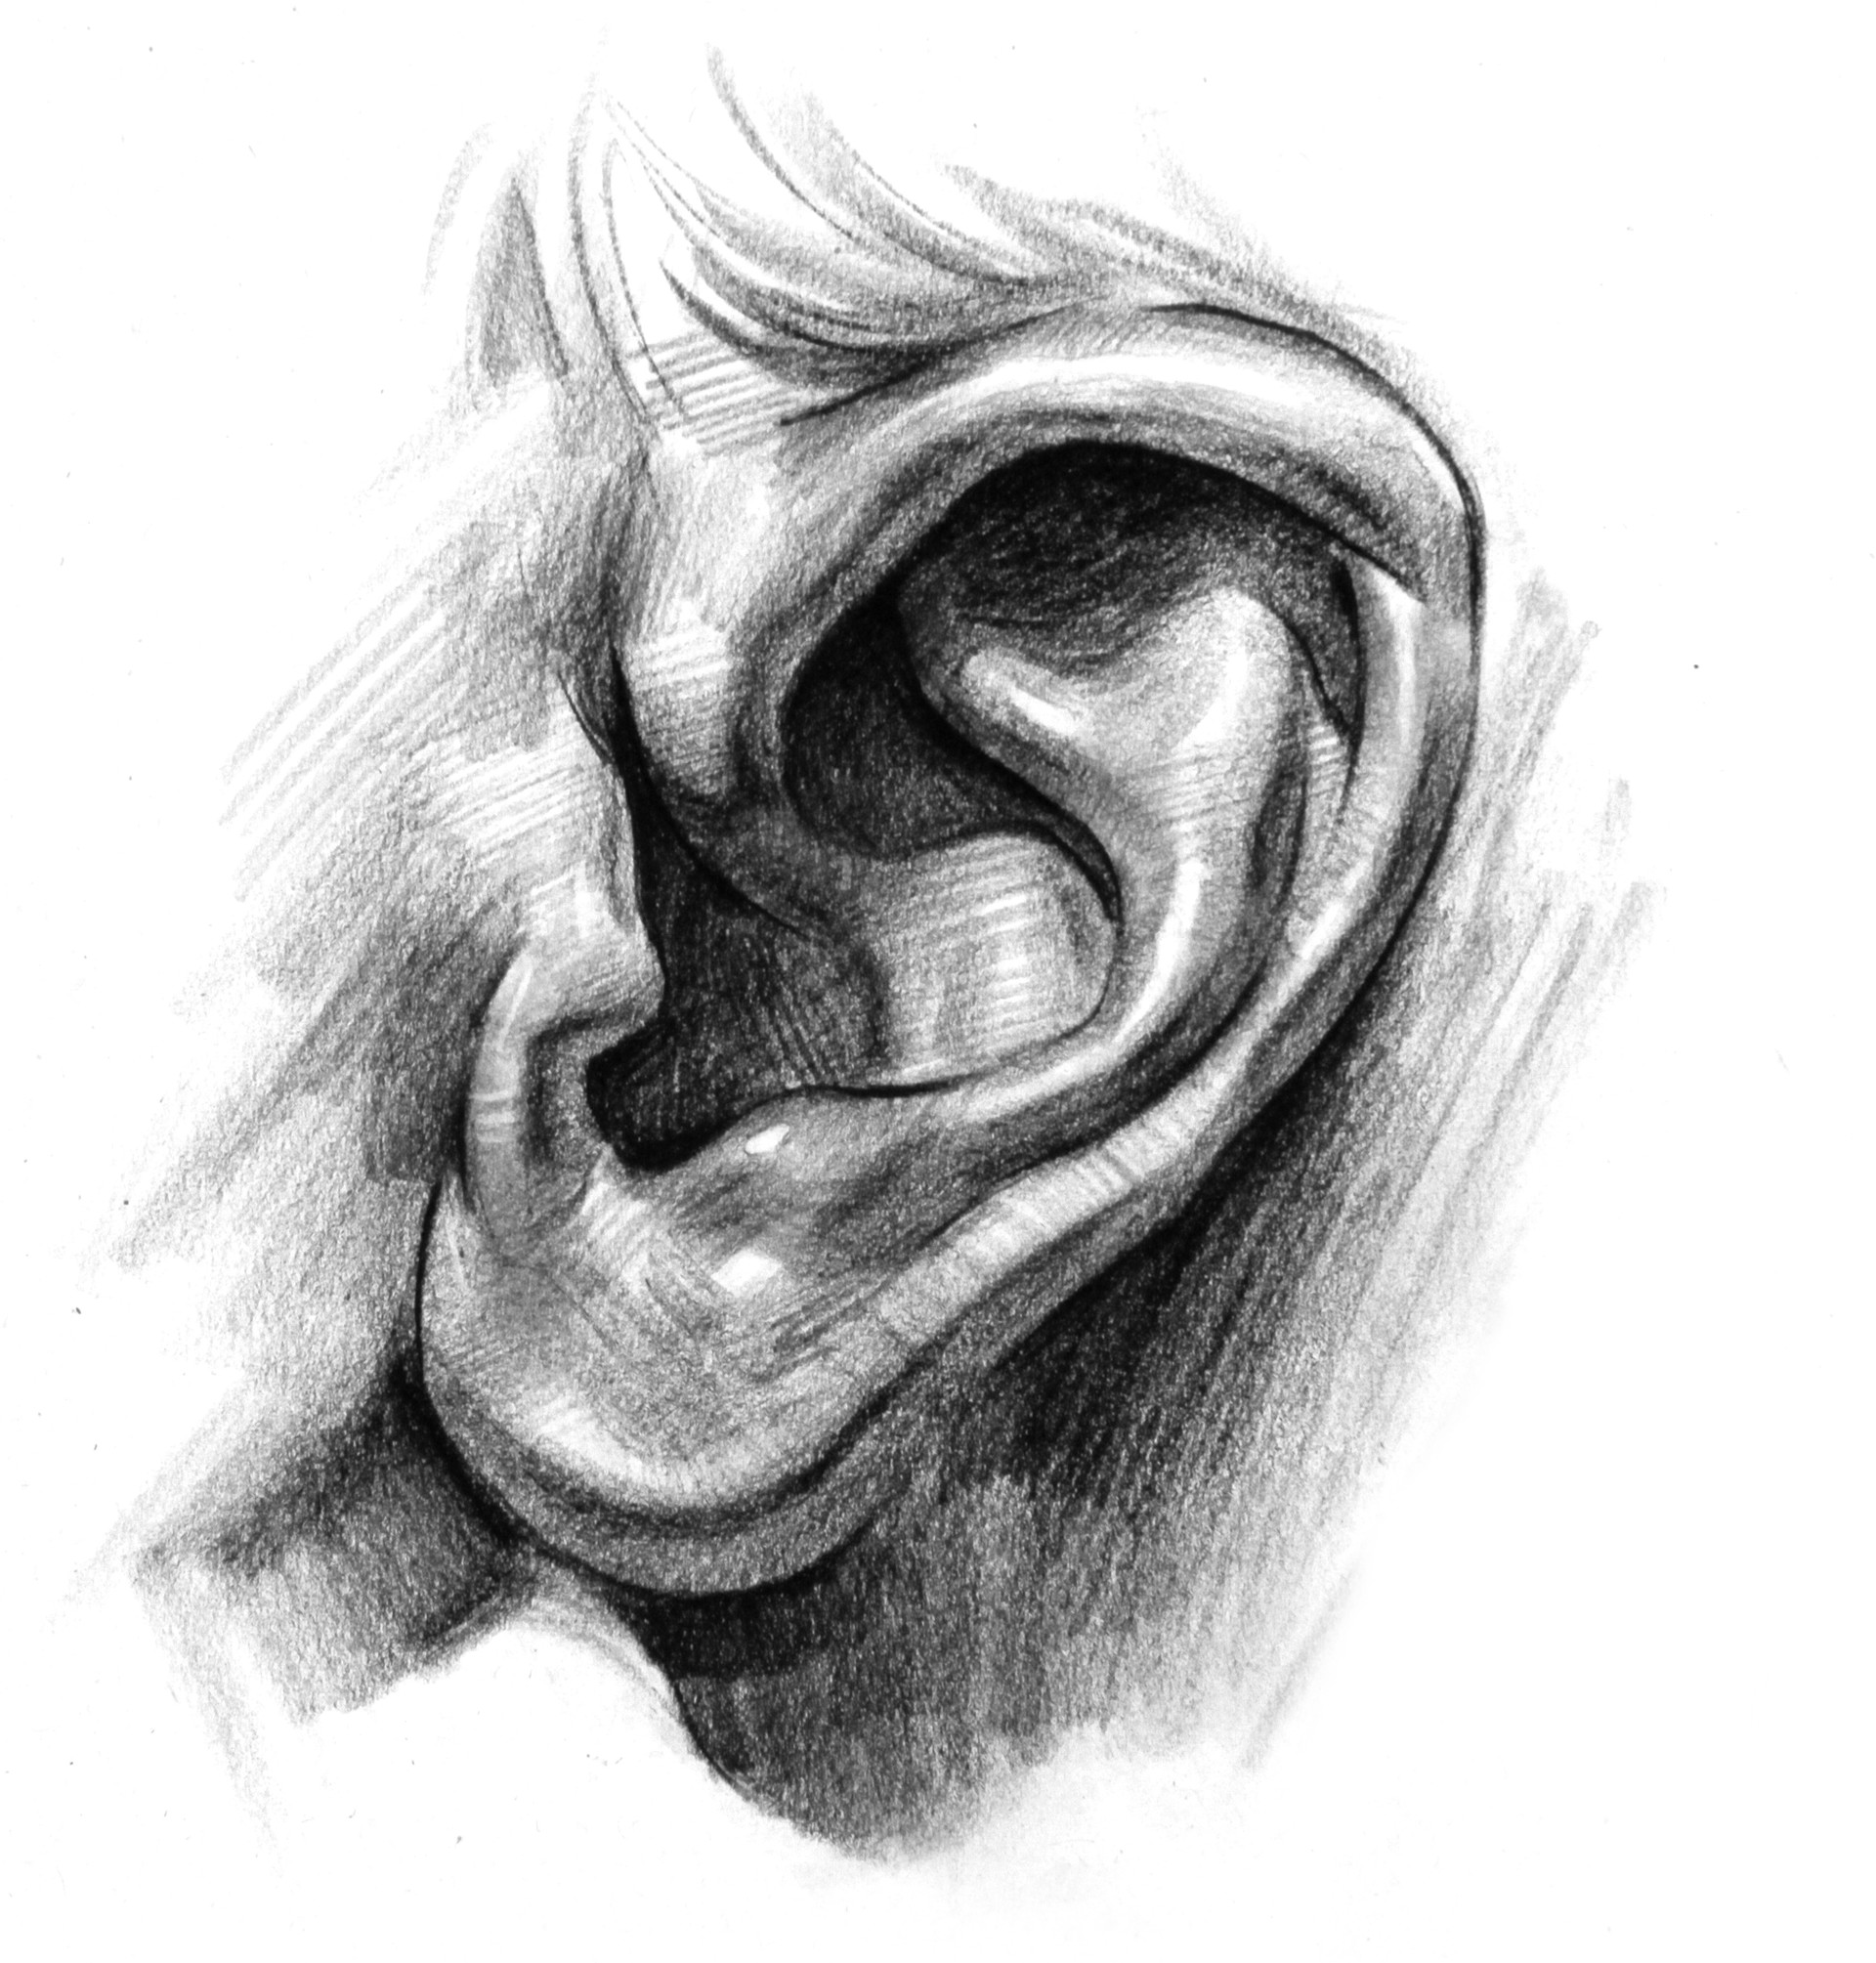 stan-prokopenko-finish How to draw an ear from the front and from the side